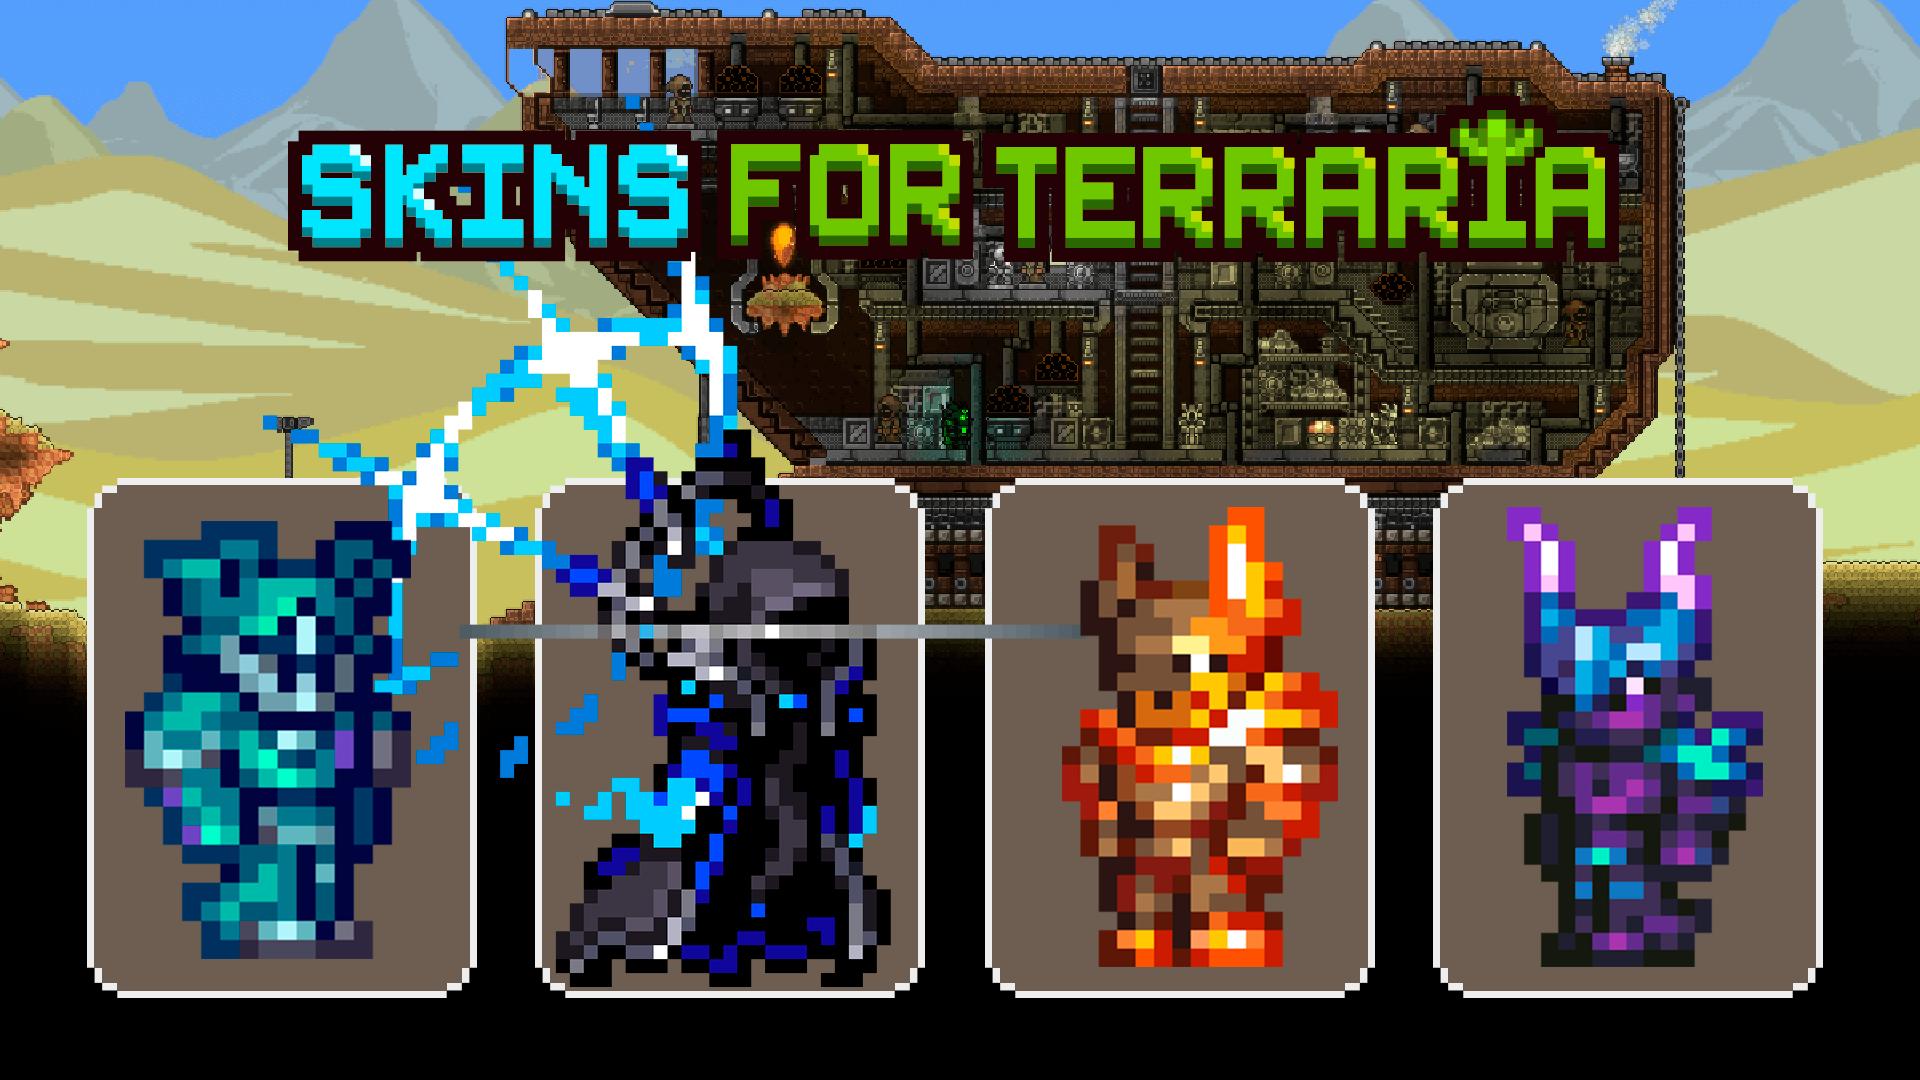 Port to forward for terraria фото 95